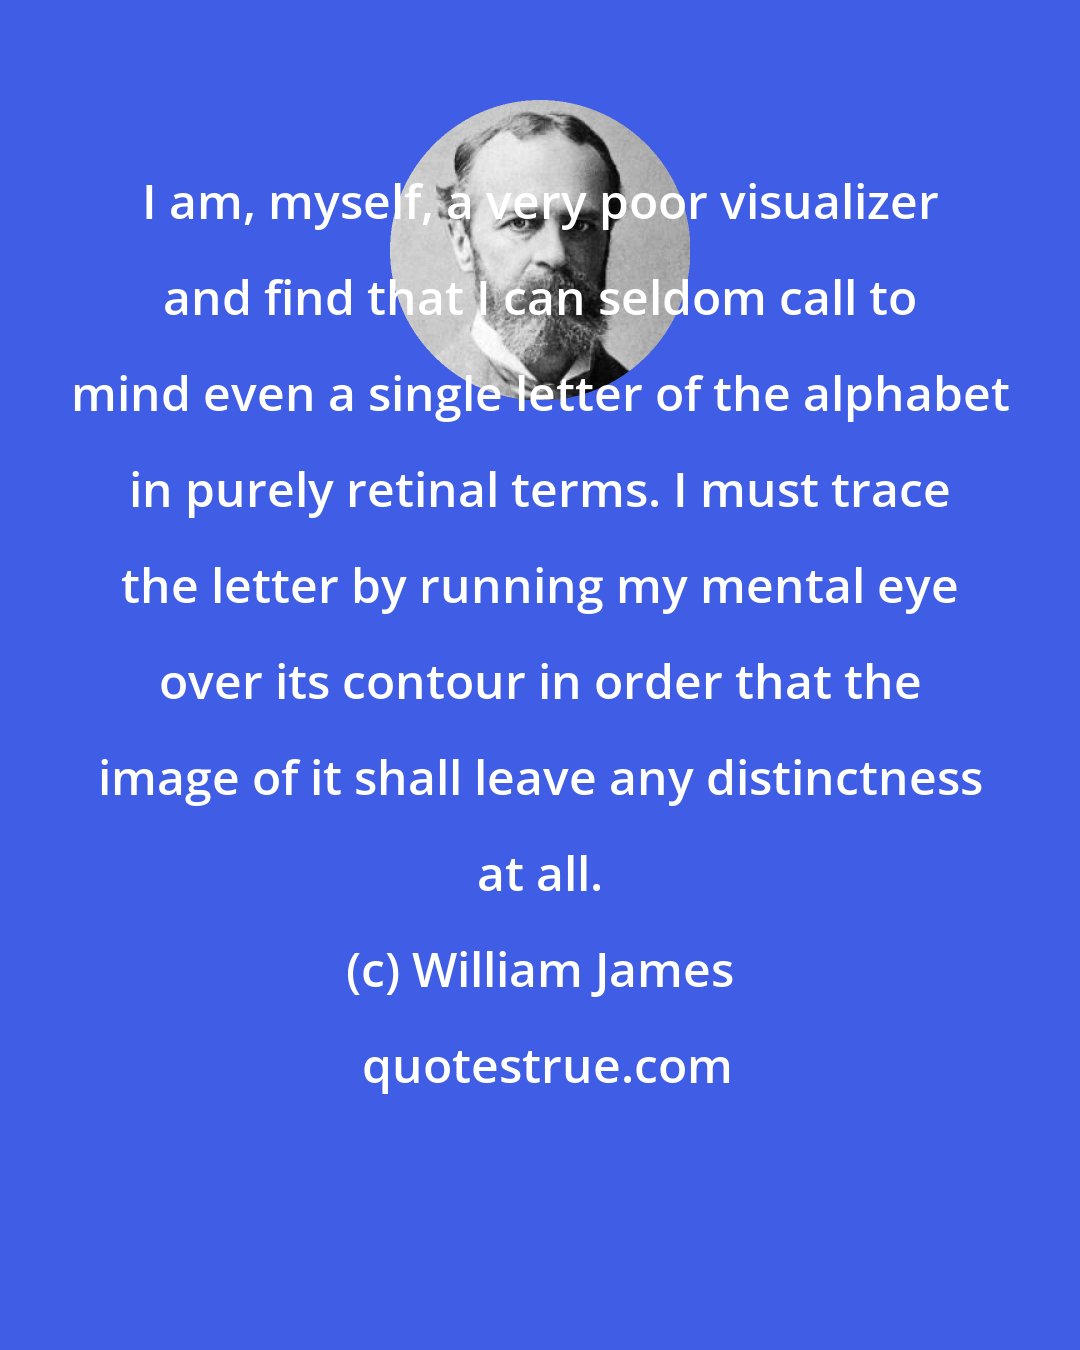 William James: I am, myself, a very poor visualizer and find that I can seldom call to mind even a single letter of the alphabet in purely retinal terms. I must trace the letter by running my mental eye over its contour in order that the image of it shall leave any distinctness at all.